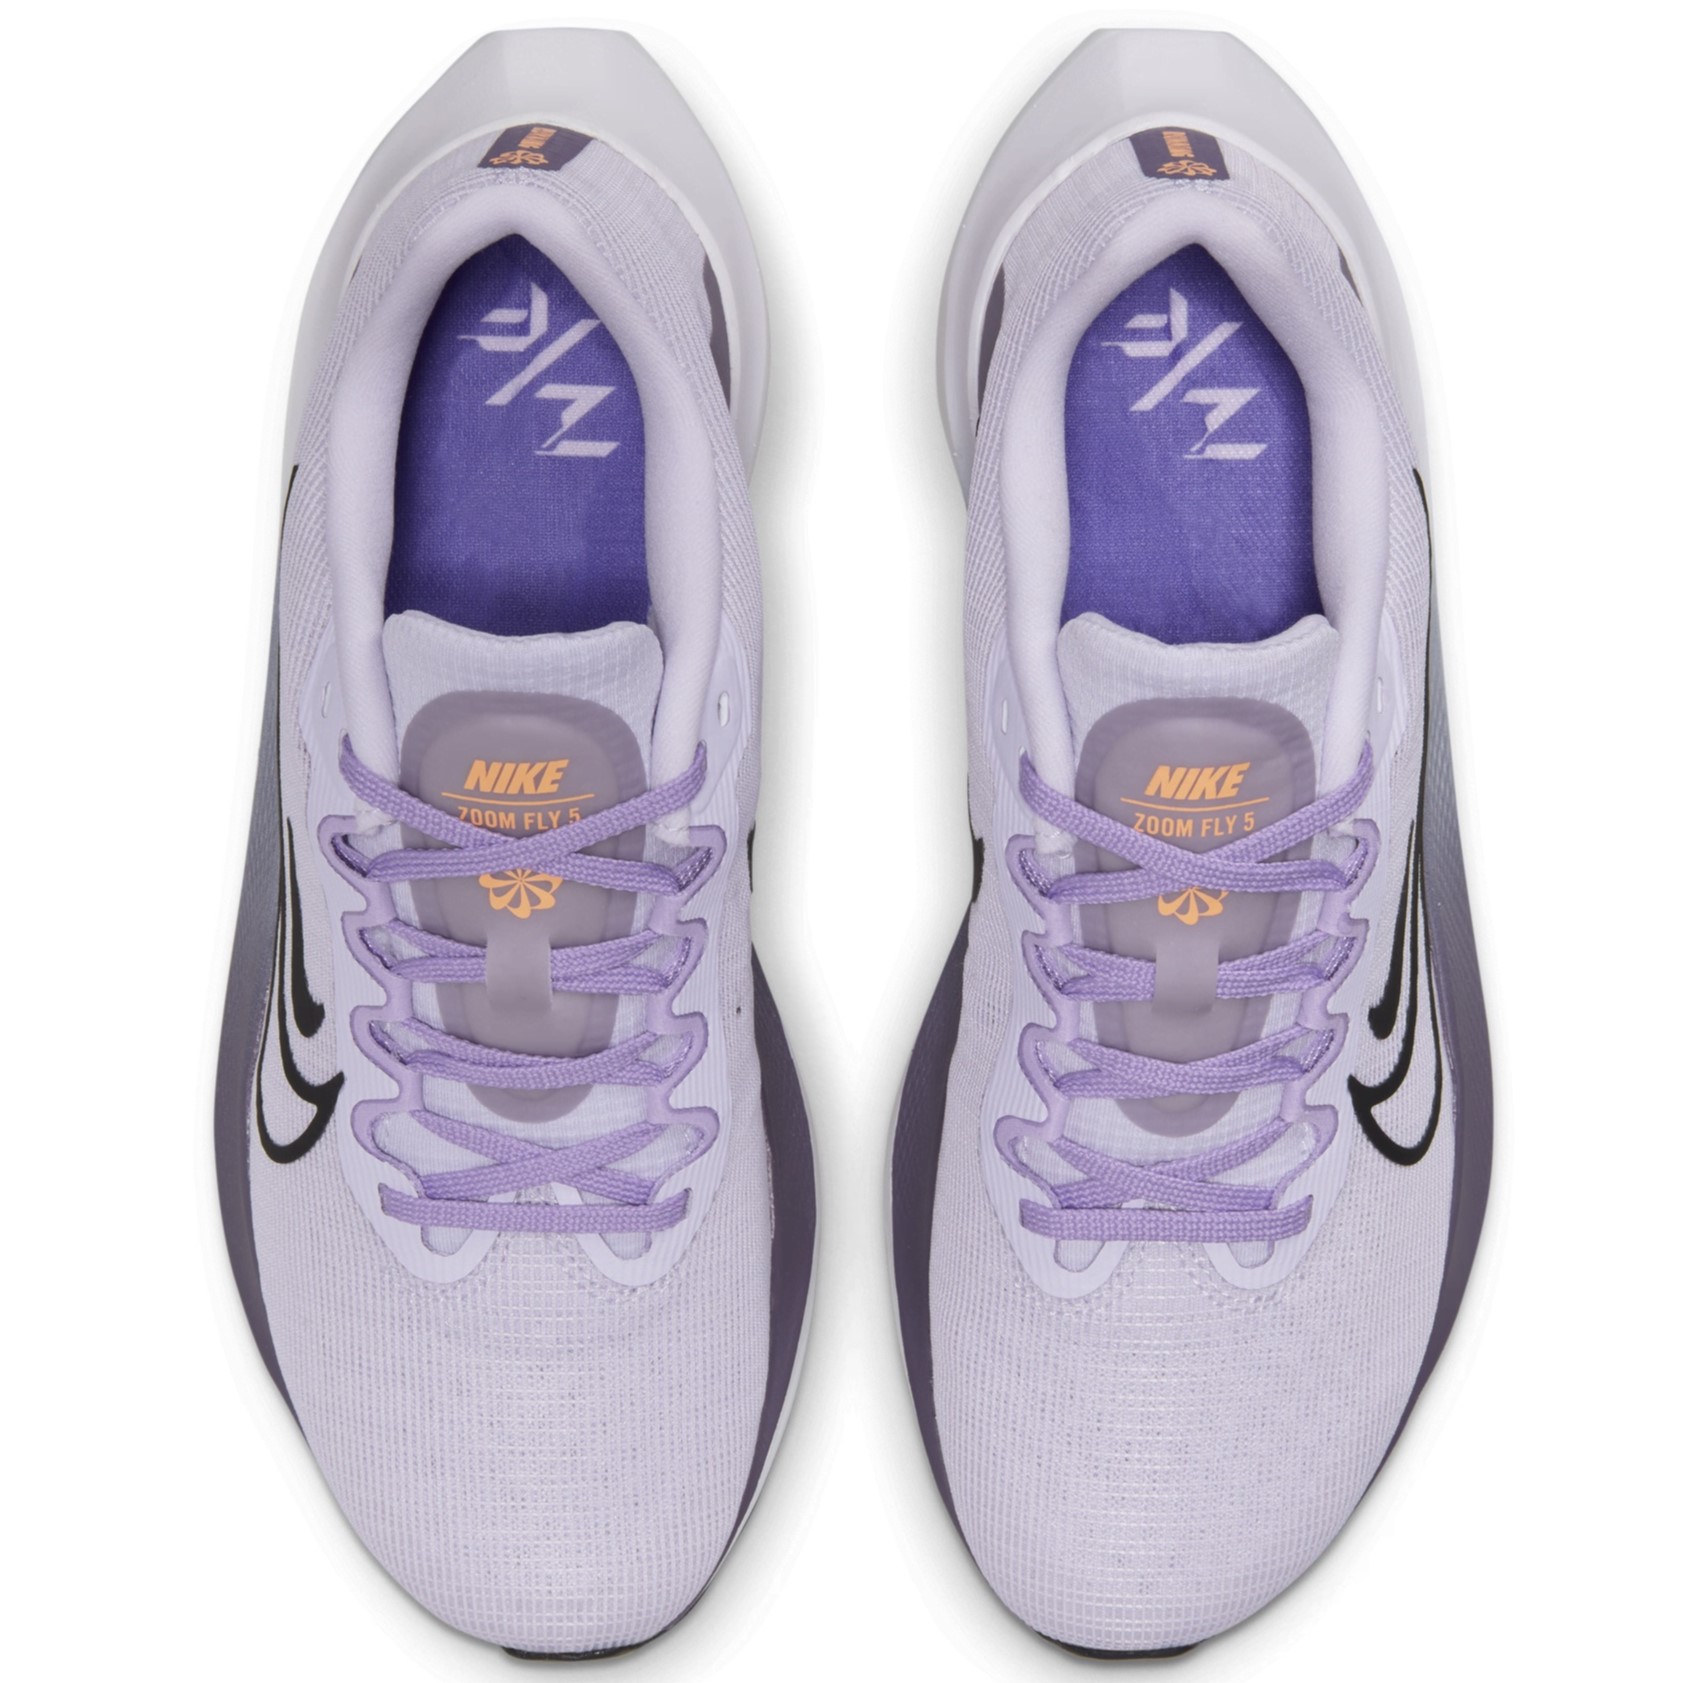 GIÀY THỂ THAO NIKE NỮ ZOOM FLY 5 WOMEN ROAD RUNNING SHOES BARELY GRAPE DM8974-500 4